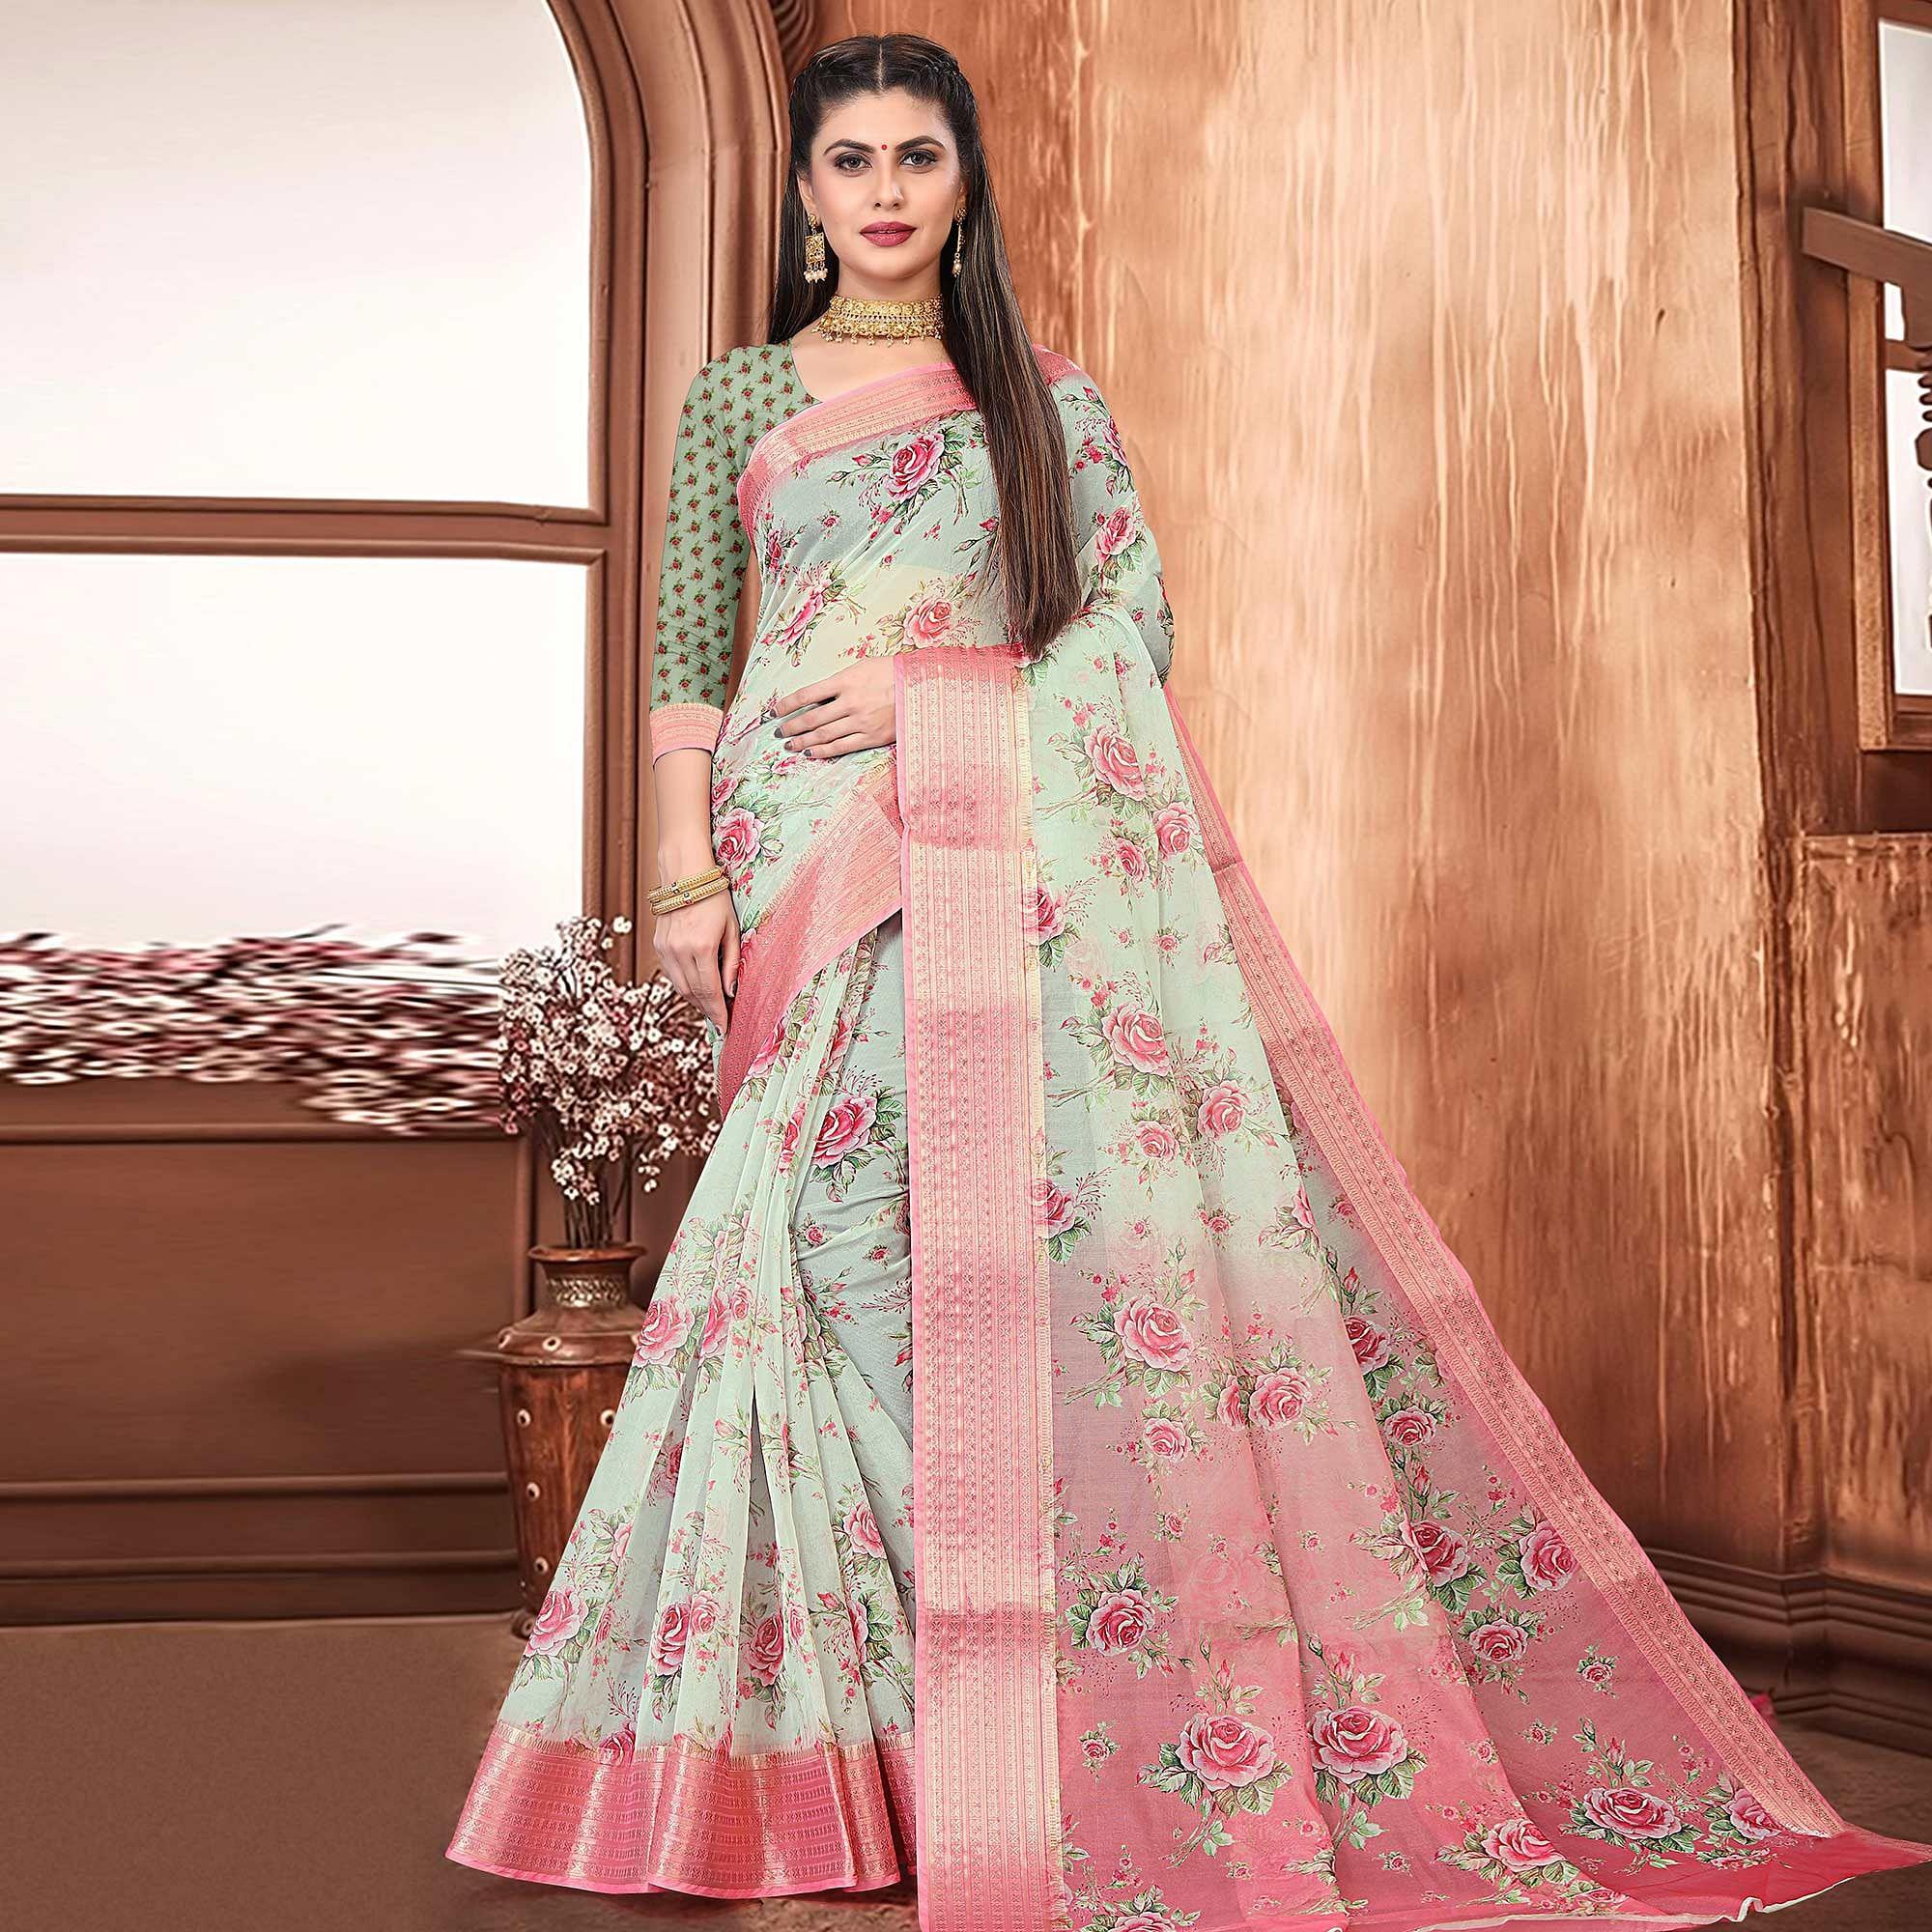 Pista Green Party Wear Floral Digital Printed With Jacquard Border Soft Georgette Saree - Peachmode